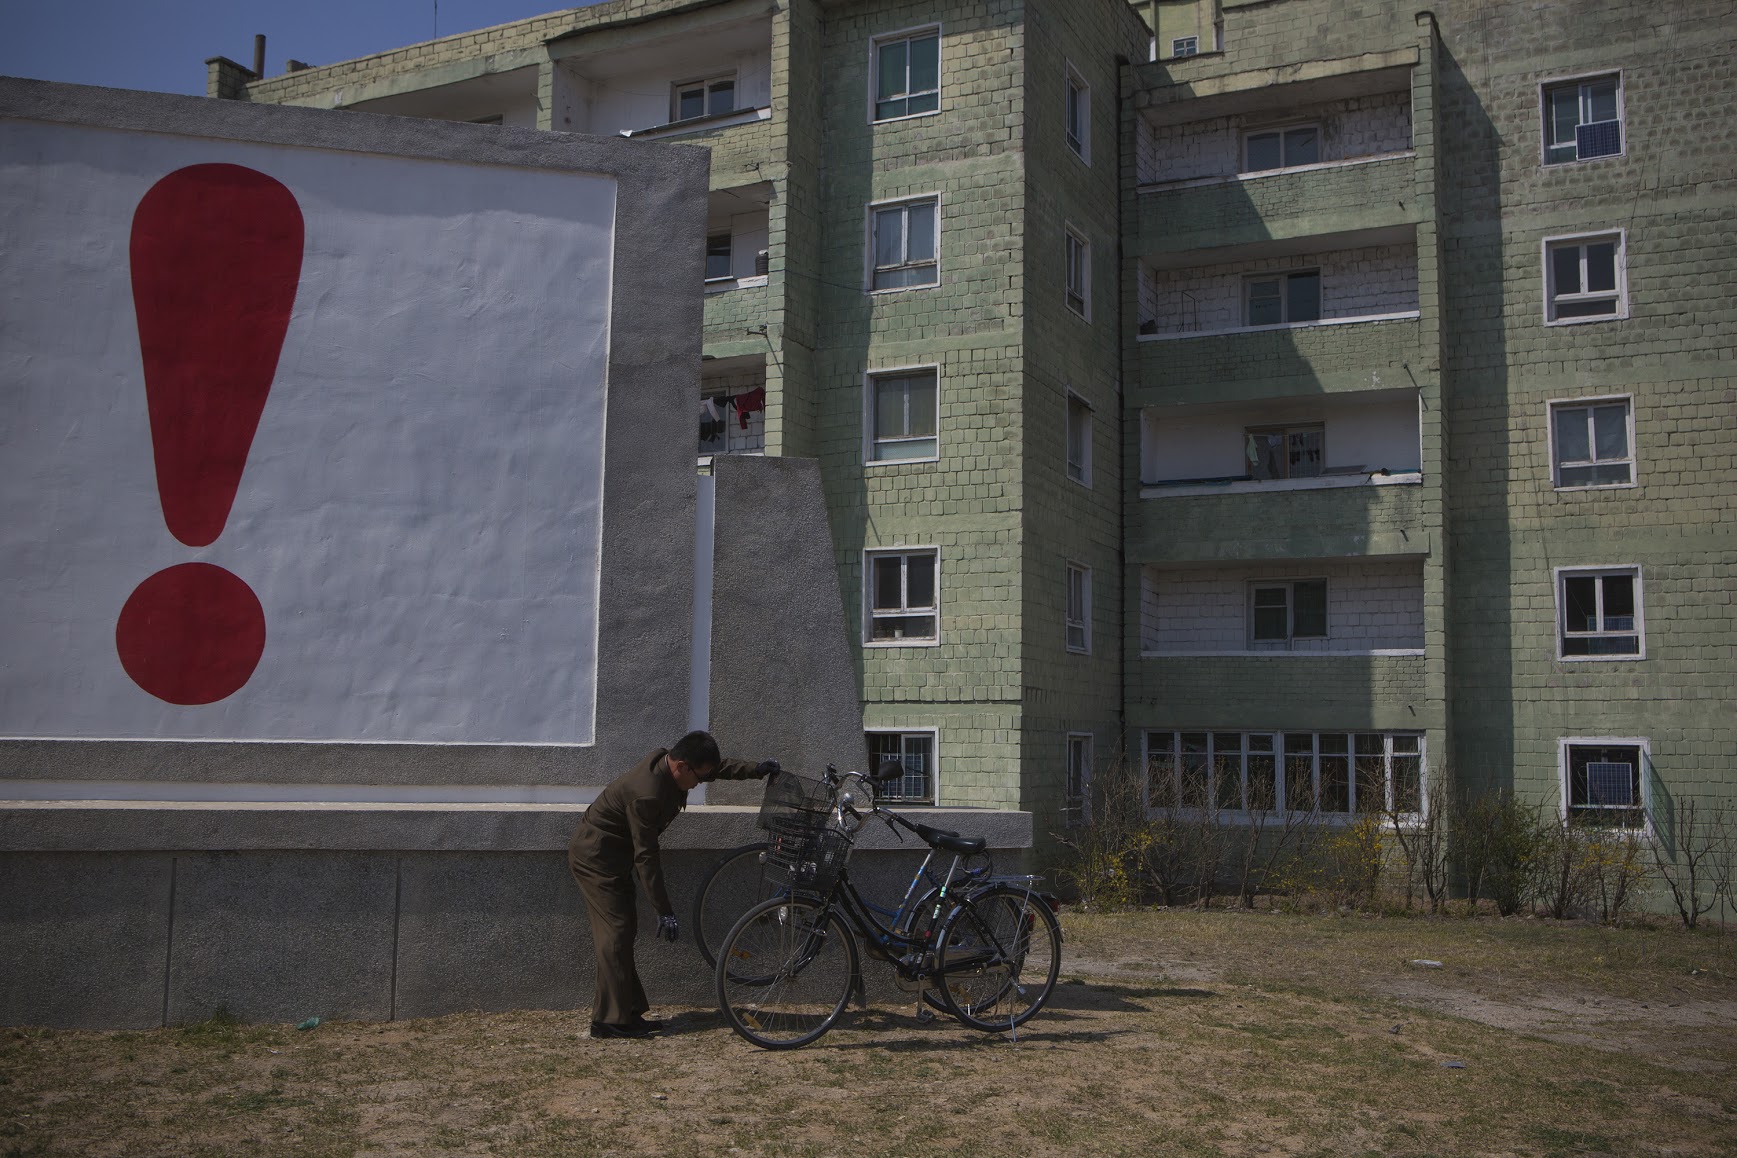 A North Korean man checks his bicycle next to a painted exclamation point on a propaganda billboard on Wednesday April 24, 2013 in Kaesong, North Korea, north of the demilitarized zone which separates the two Koreas.